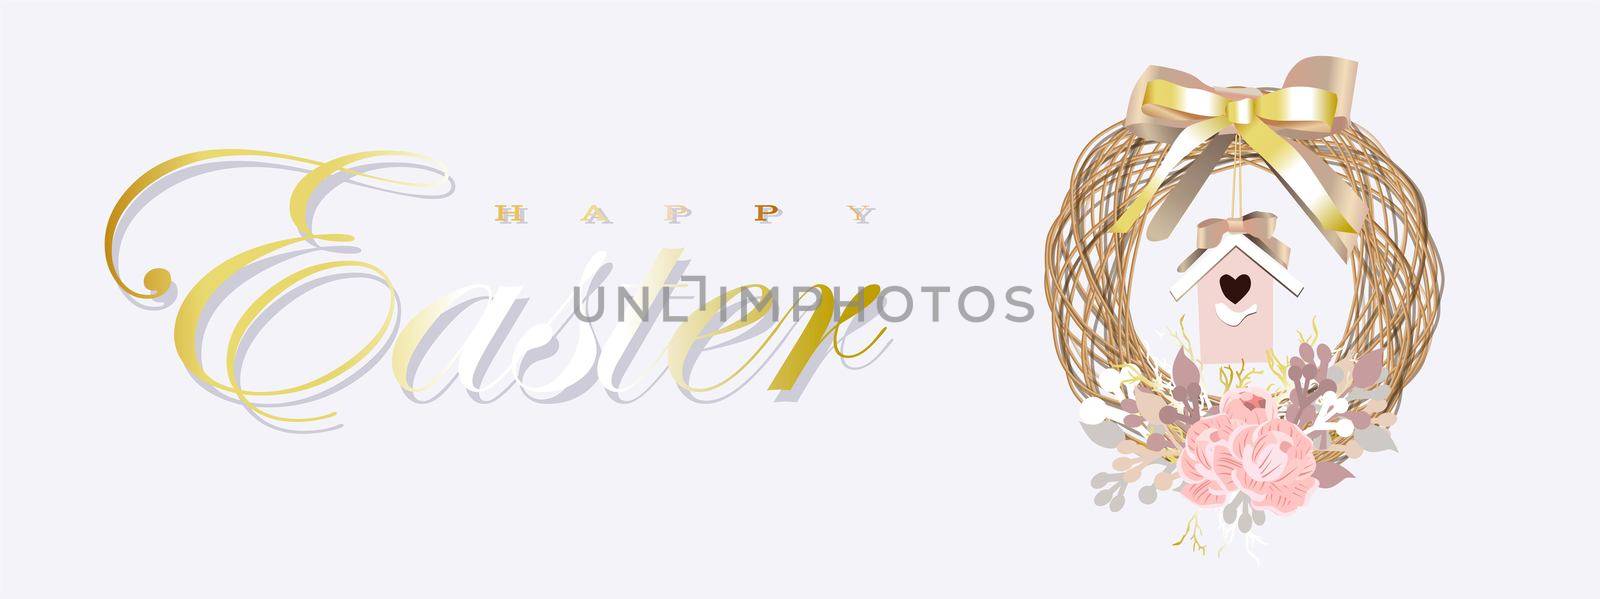 Easter banner. horizontal poster, postcard, background with text Happy Easter. Spring wreath on a gray background. elegant. Gold ribbons and confetti. Design with realistic objects. Christian religion. by annatarankova